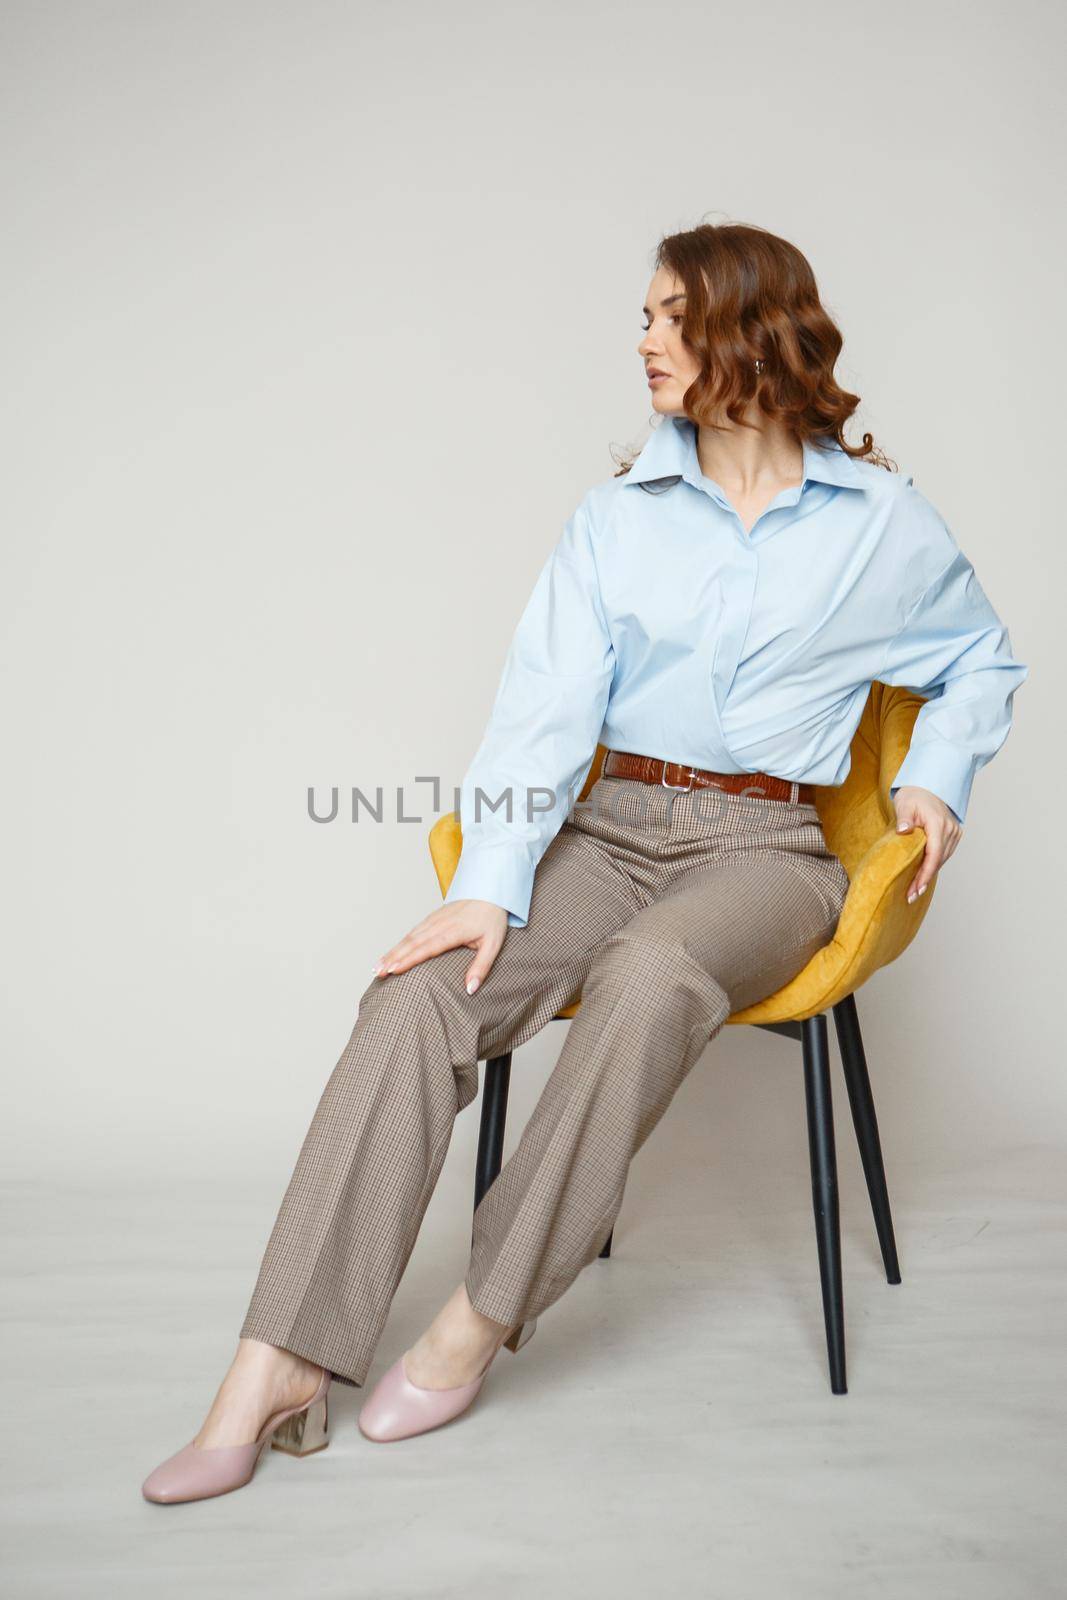 A girl in a blue shirt and trousers is sitting on a yellow chair. Shooting fashion clothes by deandy